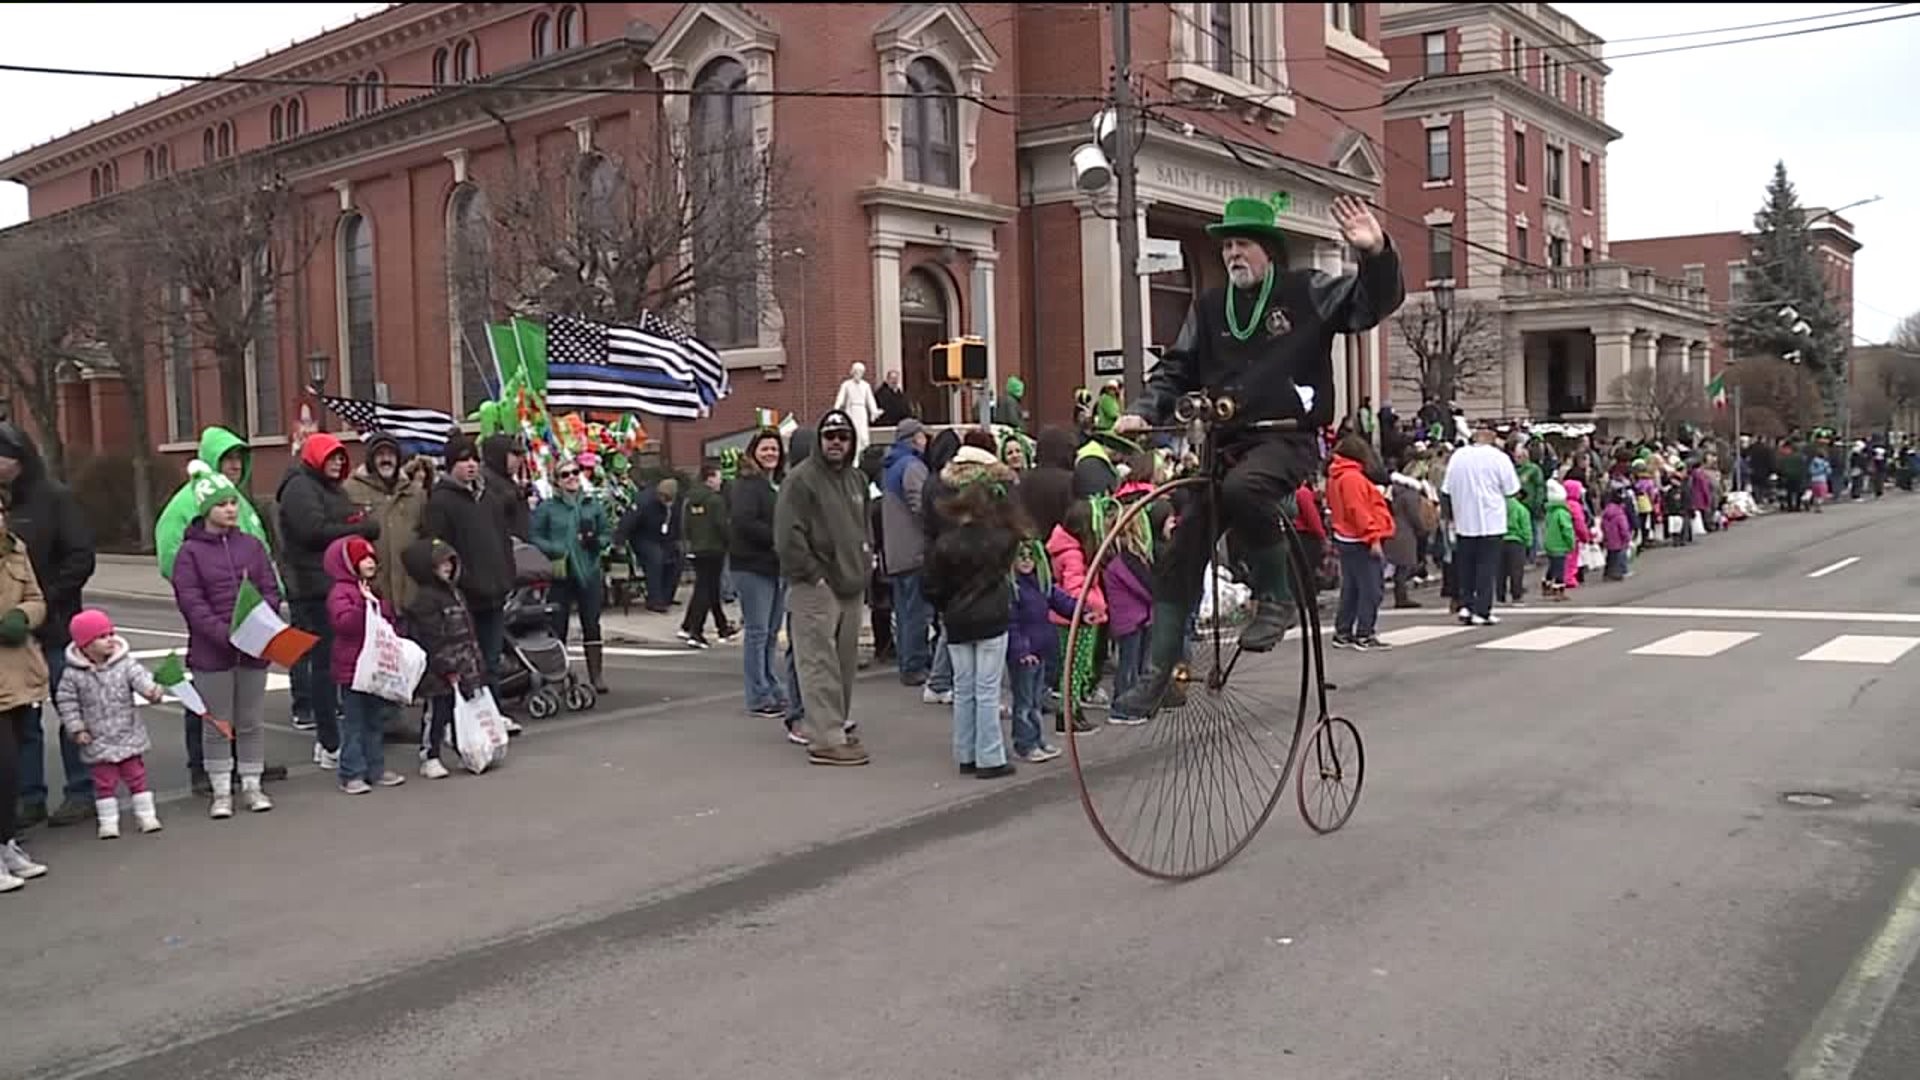 Parade Day in Scranton Brings the Crowds Downtown